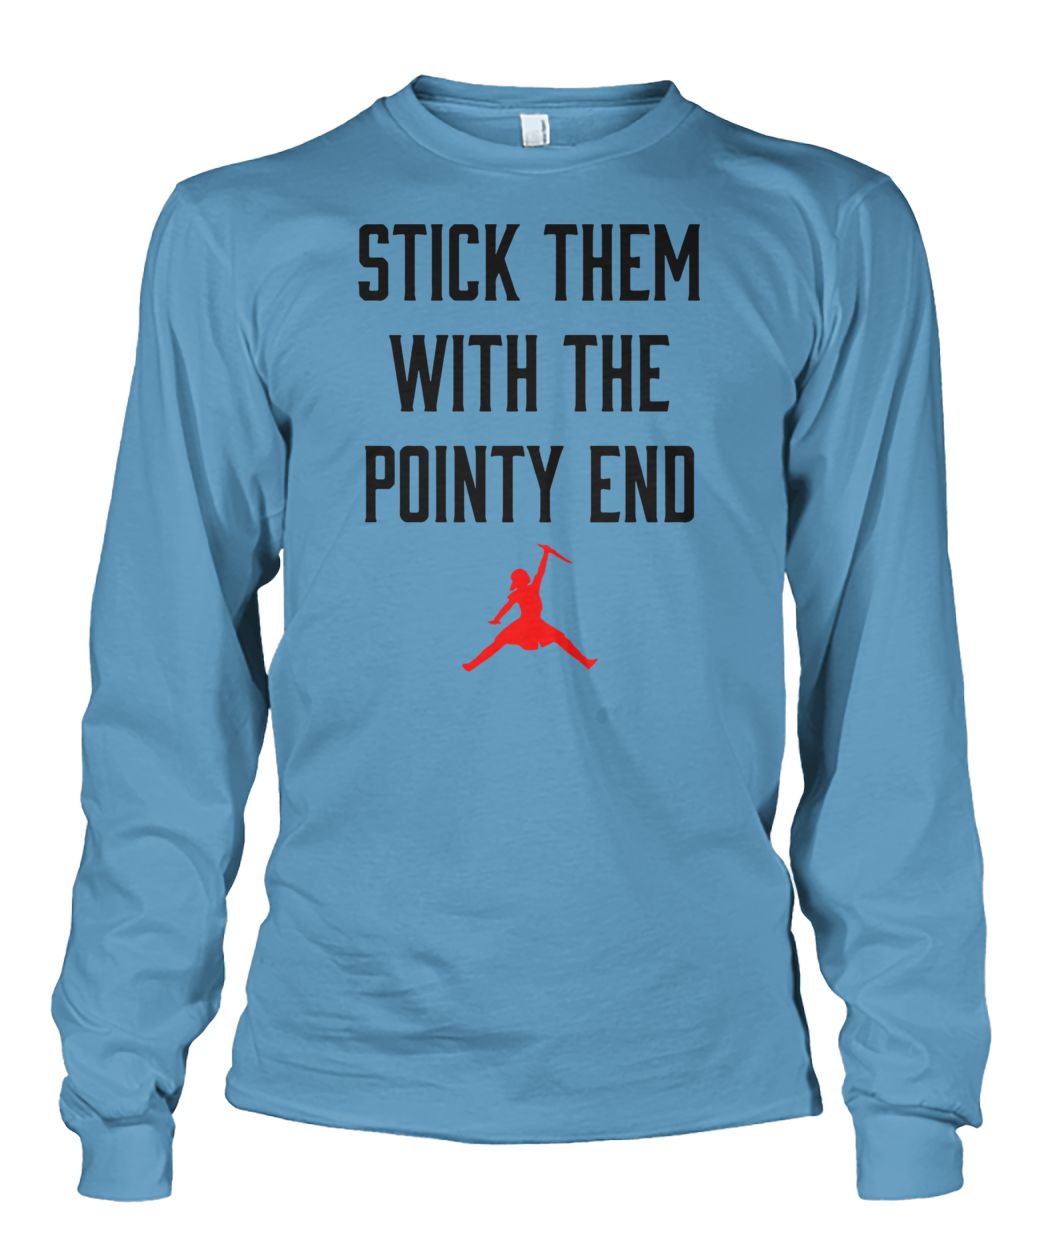 Game of thrones arya stark air jordan stick them with the pointy end unisex long sleeve